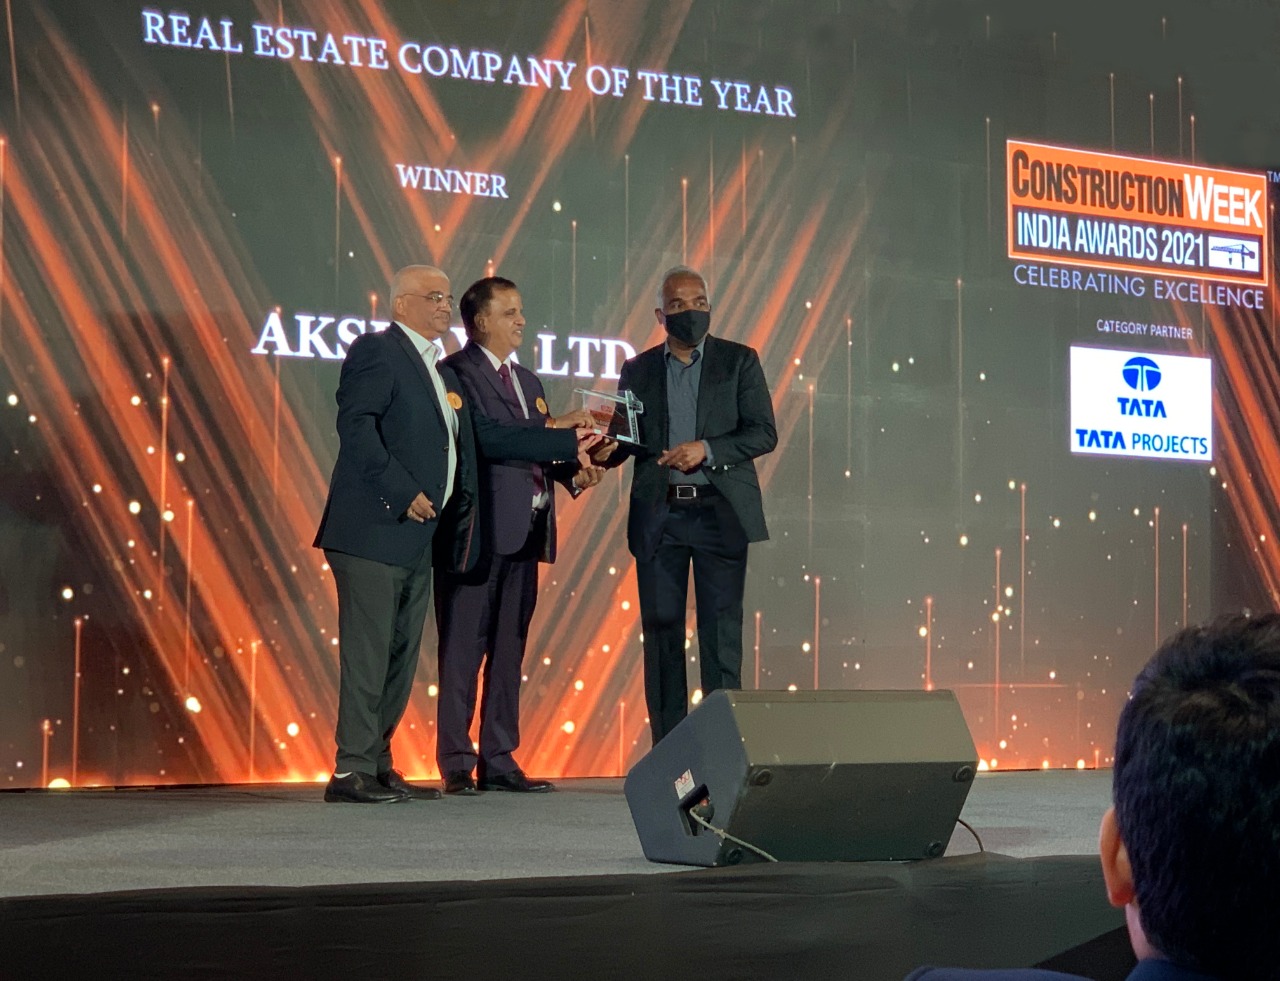 Akshaya Pvt Ltd recognized as the Real Estate Company of the year 2021 decoding=